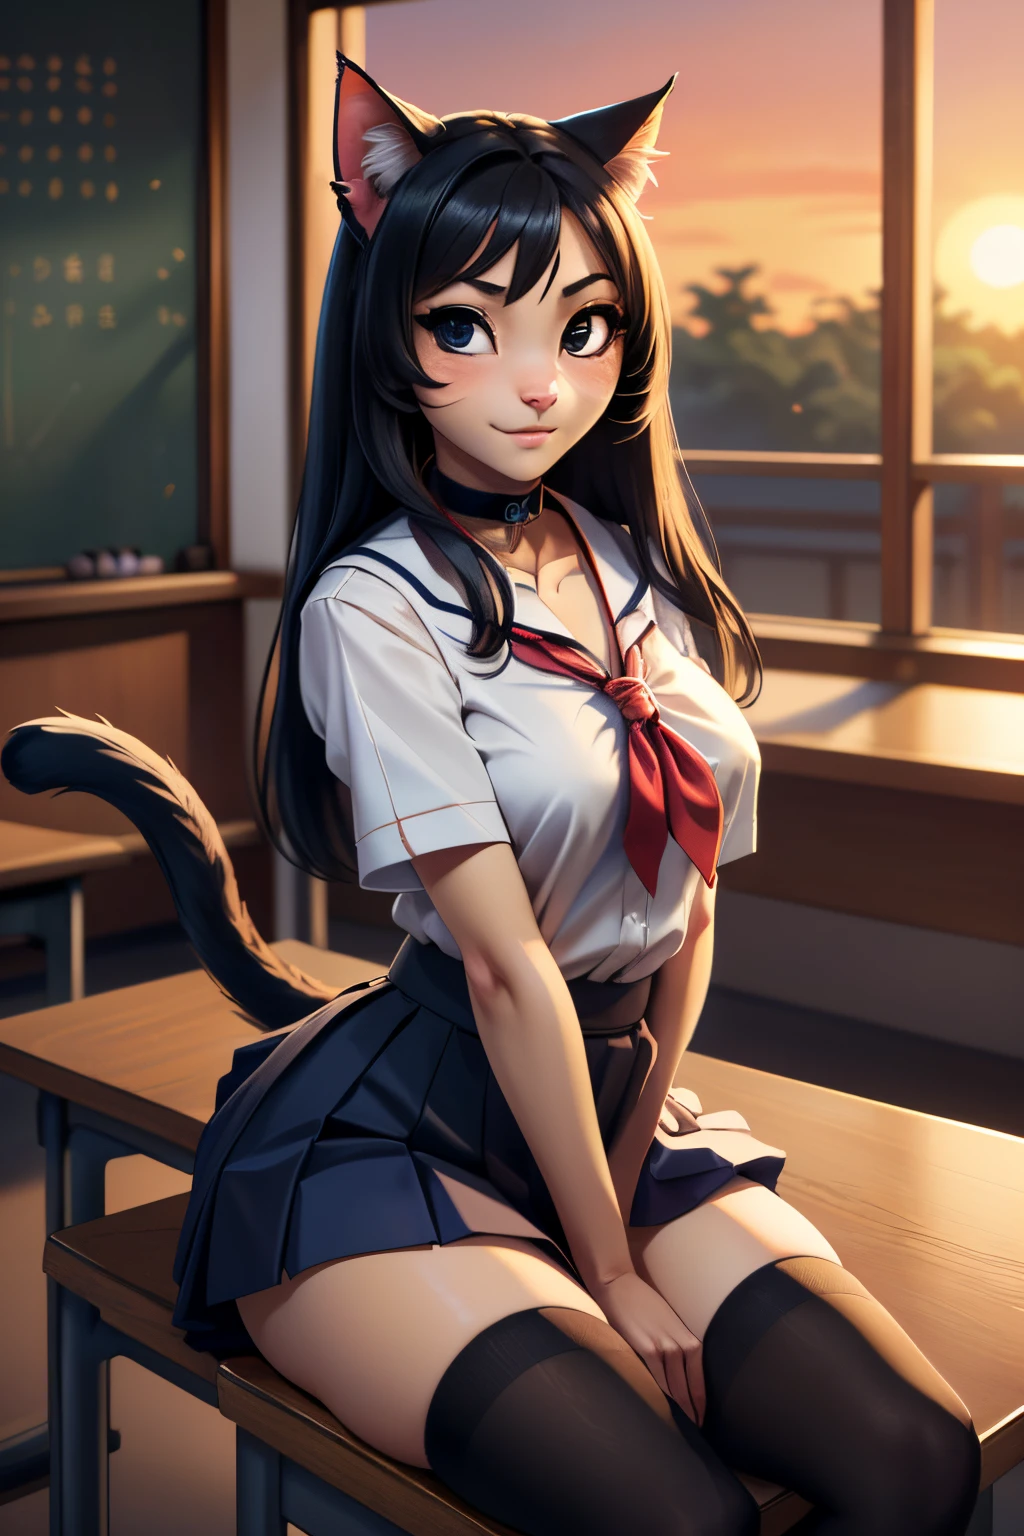 ((ultra quality)), ((tmasterpiece)), Girl-khajiit, Japanese school girl, anthro cat, furry, ((Black long hair)), ((there are only cat ears)), ((There is a cat's long tail in the back)), Beautiful cute face, beautiful female lips, charming beauty, ((Kind expression on his face)), looks at the camera with his eyes slightly closed, ((Skin color: white)), ((there is cat hair on the body)), Body glare, ((detailed beautiful female eyes)), ((kblack eyes)), beautiful female hands, ((perfect female figure)), ideal female body shapes, Beautiful waist, big thighs, Beautiful butt, ((Subtle and beautiful)), seductively leaning against the school desk ((closeup face)), ((Dressed in Japanese , dark blue skirt, dark blue knee socks, brown shoes, black choker around the neck), background: The Japanese School, Japanese School Class, beautiful sunset outside, ((Depth of field)), ((high quality clear image)), ((crisp details)), ((higly detailed)), Realistic, Professional Photo Session, ((Clear Focus)), ((cartoon)), the anime, NSFW